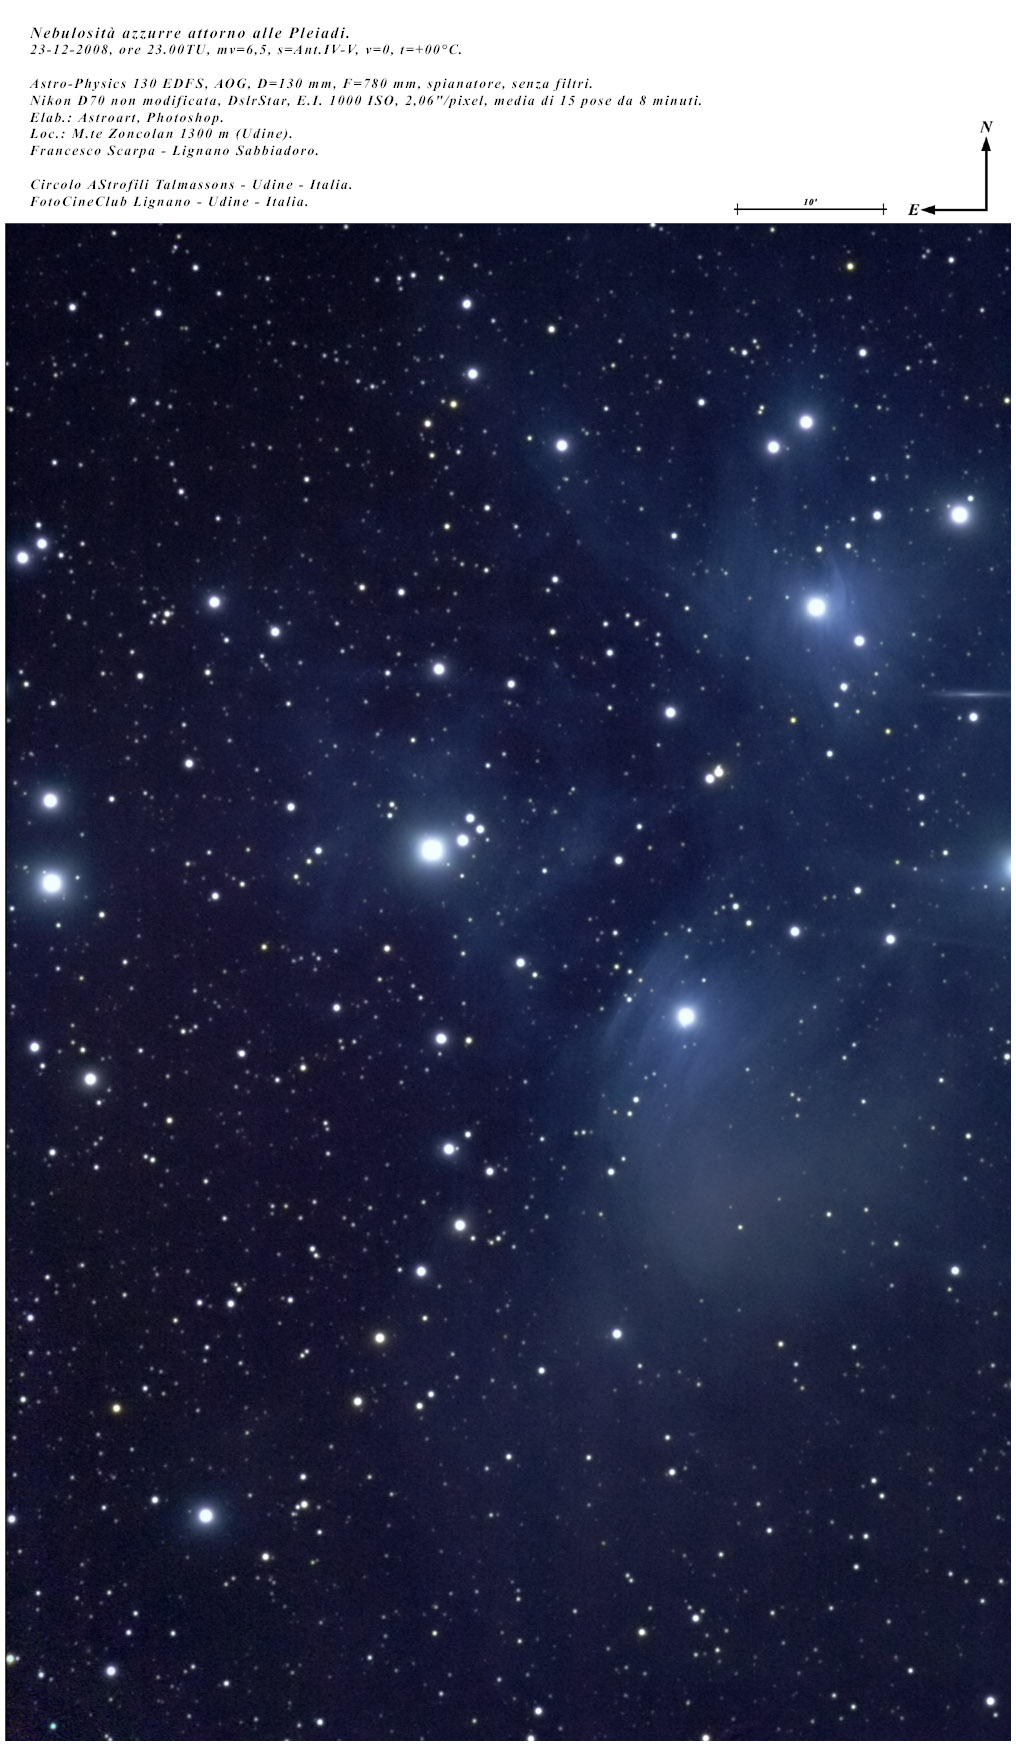 Plejades open cluster: 248 KB; click on the image to enlarge